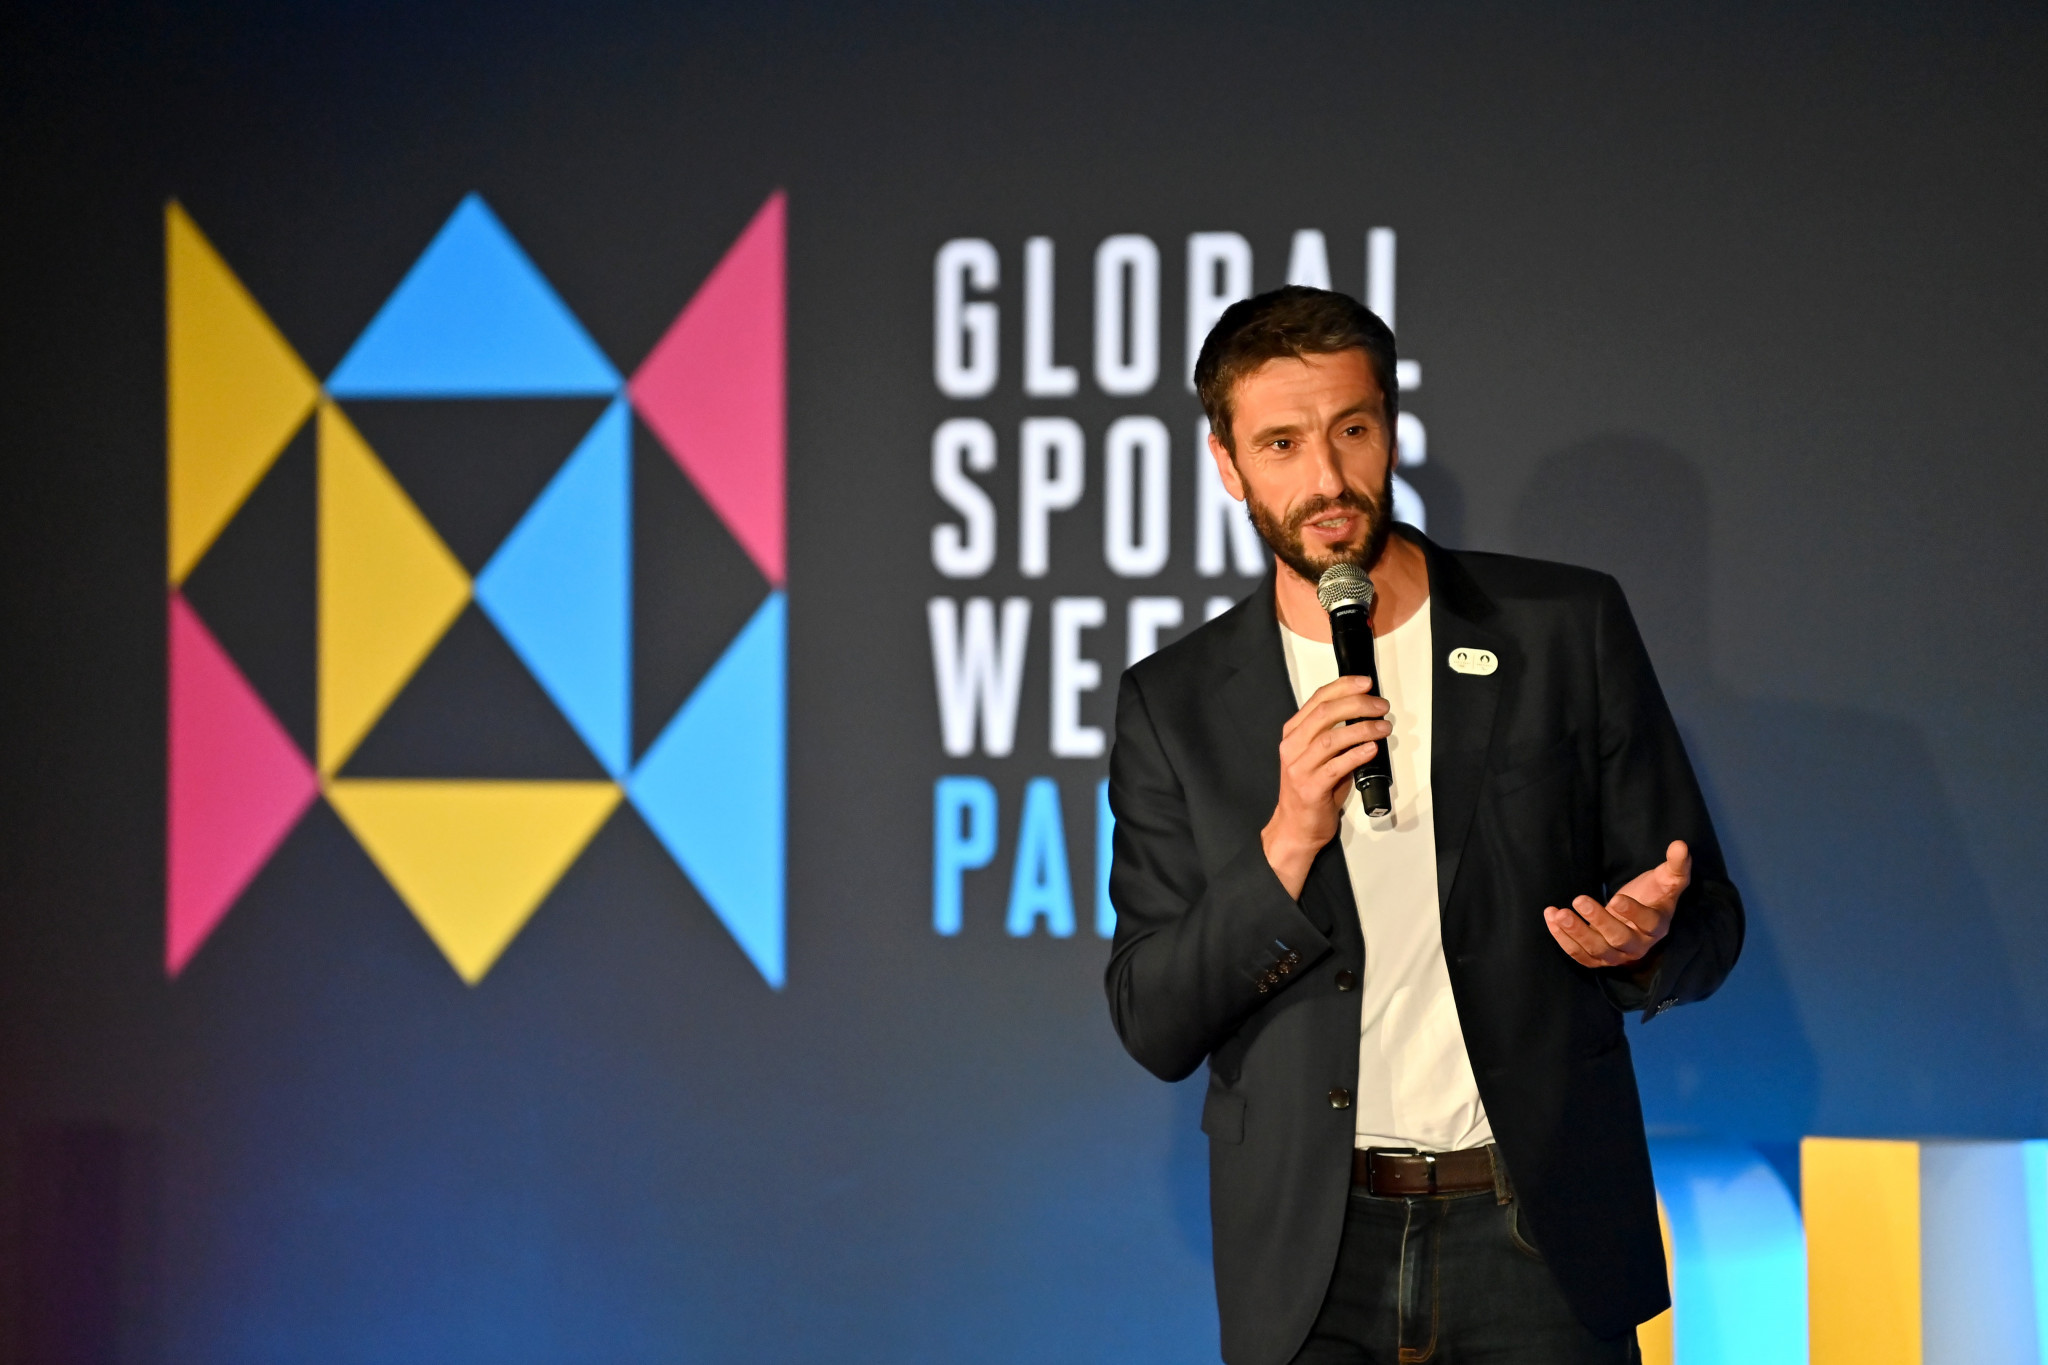 Paris 2024 President Tony Estanguet discussed plans for the Opening Ceremony of the Olympics in the French capital at Global Sports Week ©Getty Images